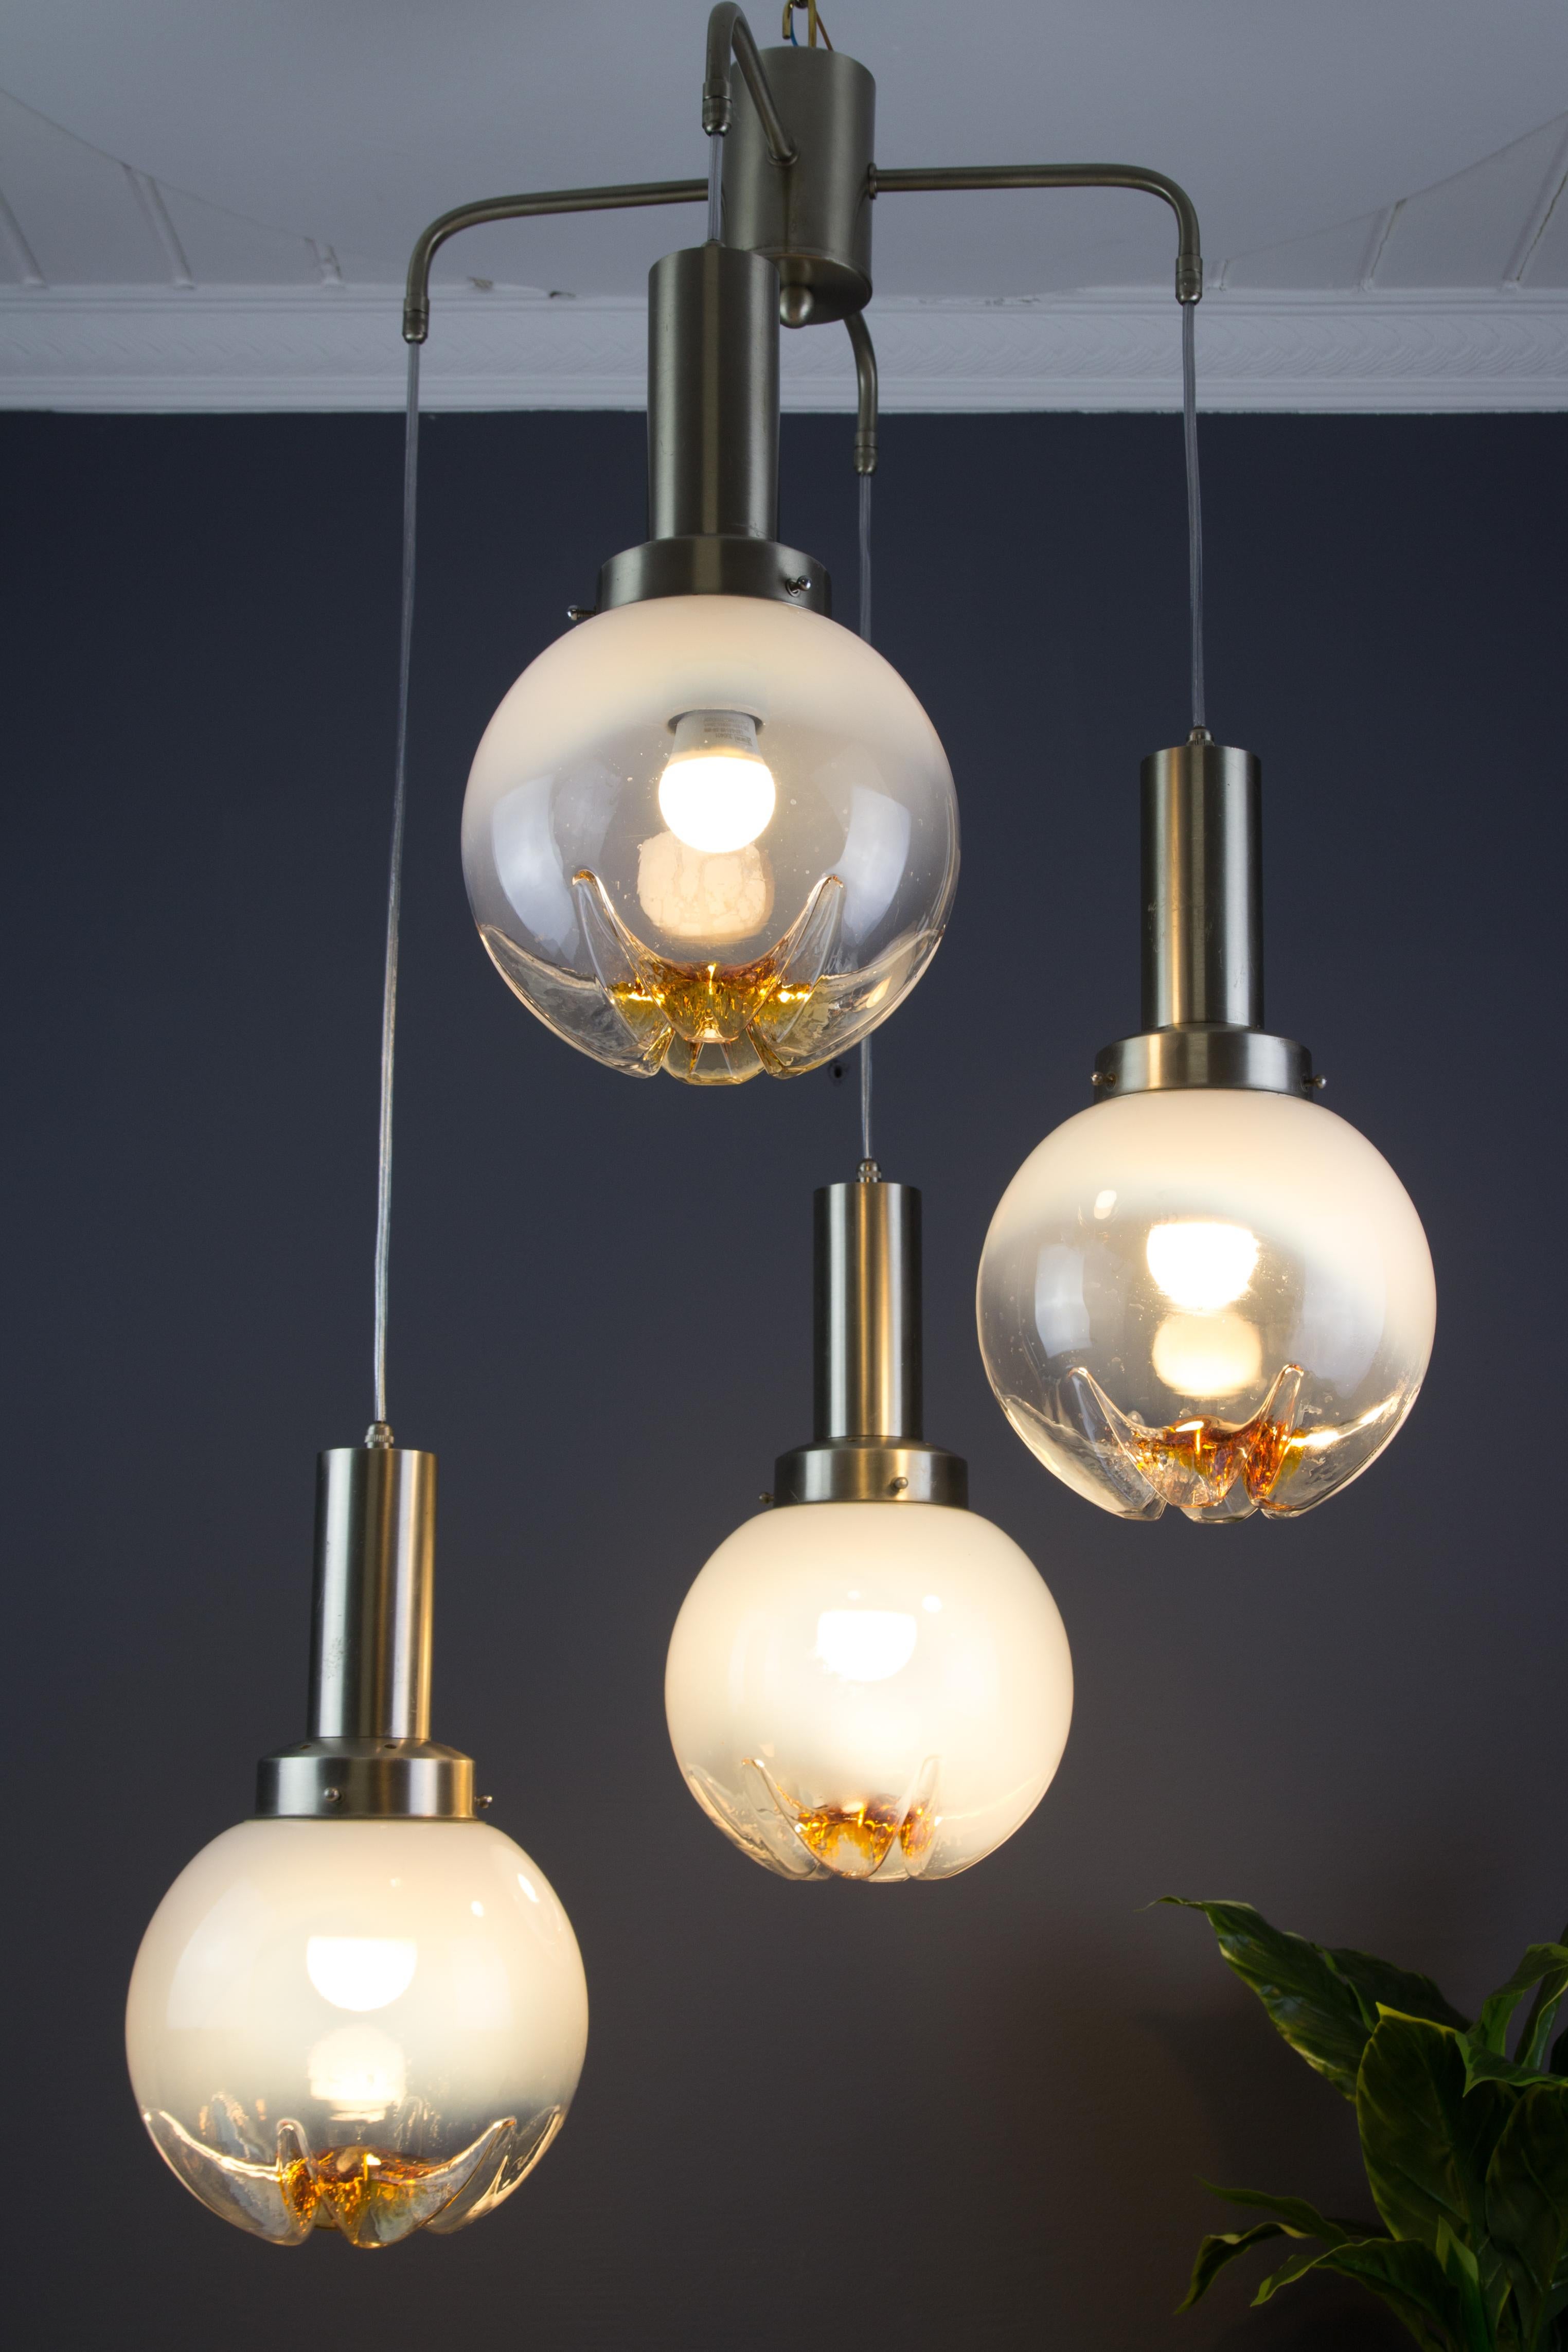 The spectacular Italian pendant chandelier features four large Murano art glass suspension lights in clear and orange on a steel frame. Four sockets for the E27 (E26) size light bulb.
Dimensions: height 95 cm / 37.4 in; width 50 cm / 19.68 in; depth